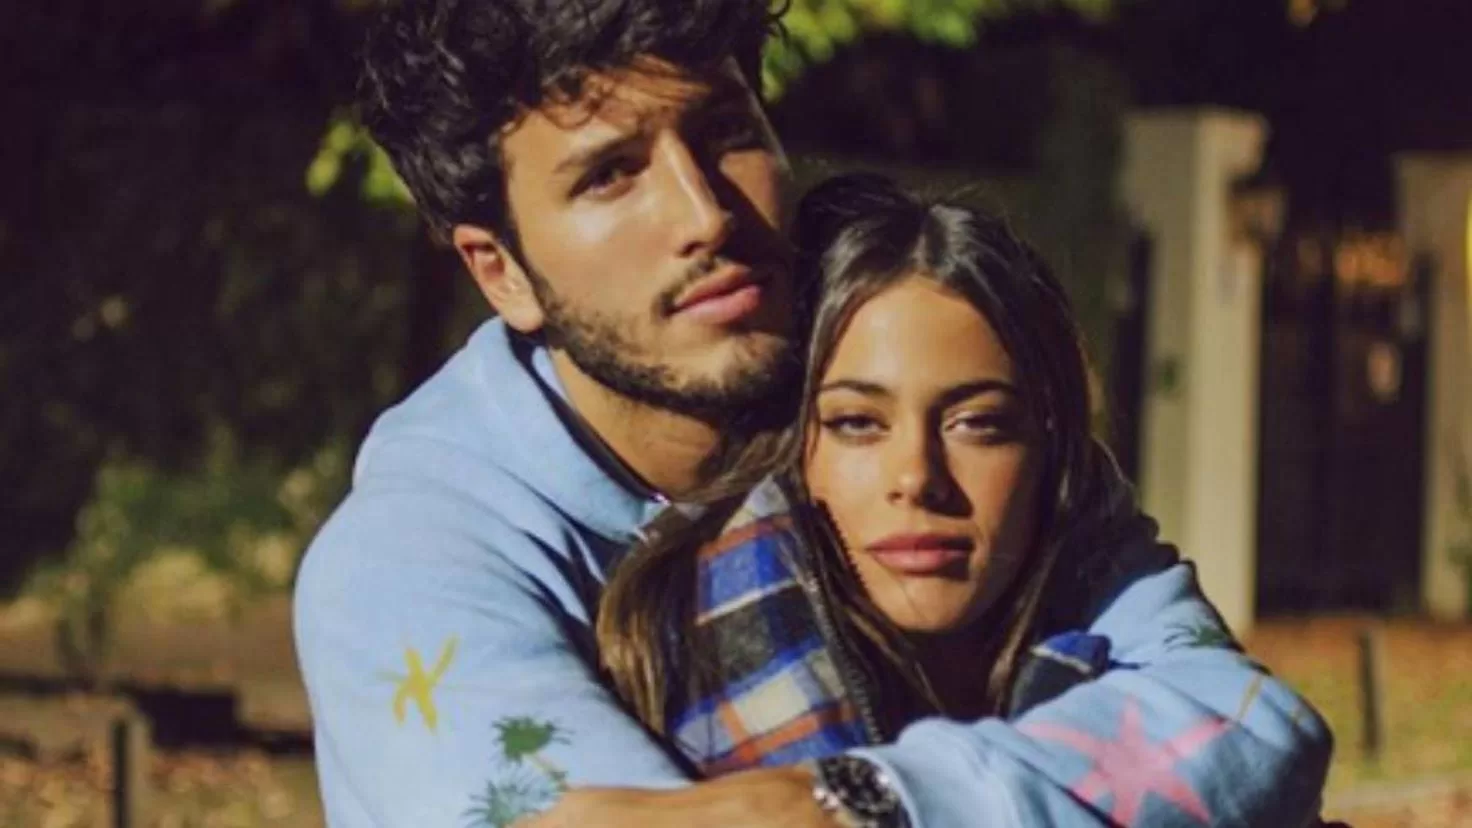 Sebastin Yatra reveals the reason for his breakup with Tini Stoessel: It was something immature
